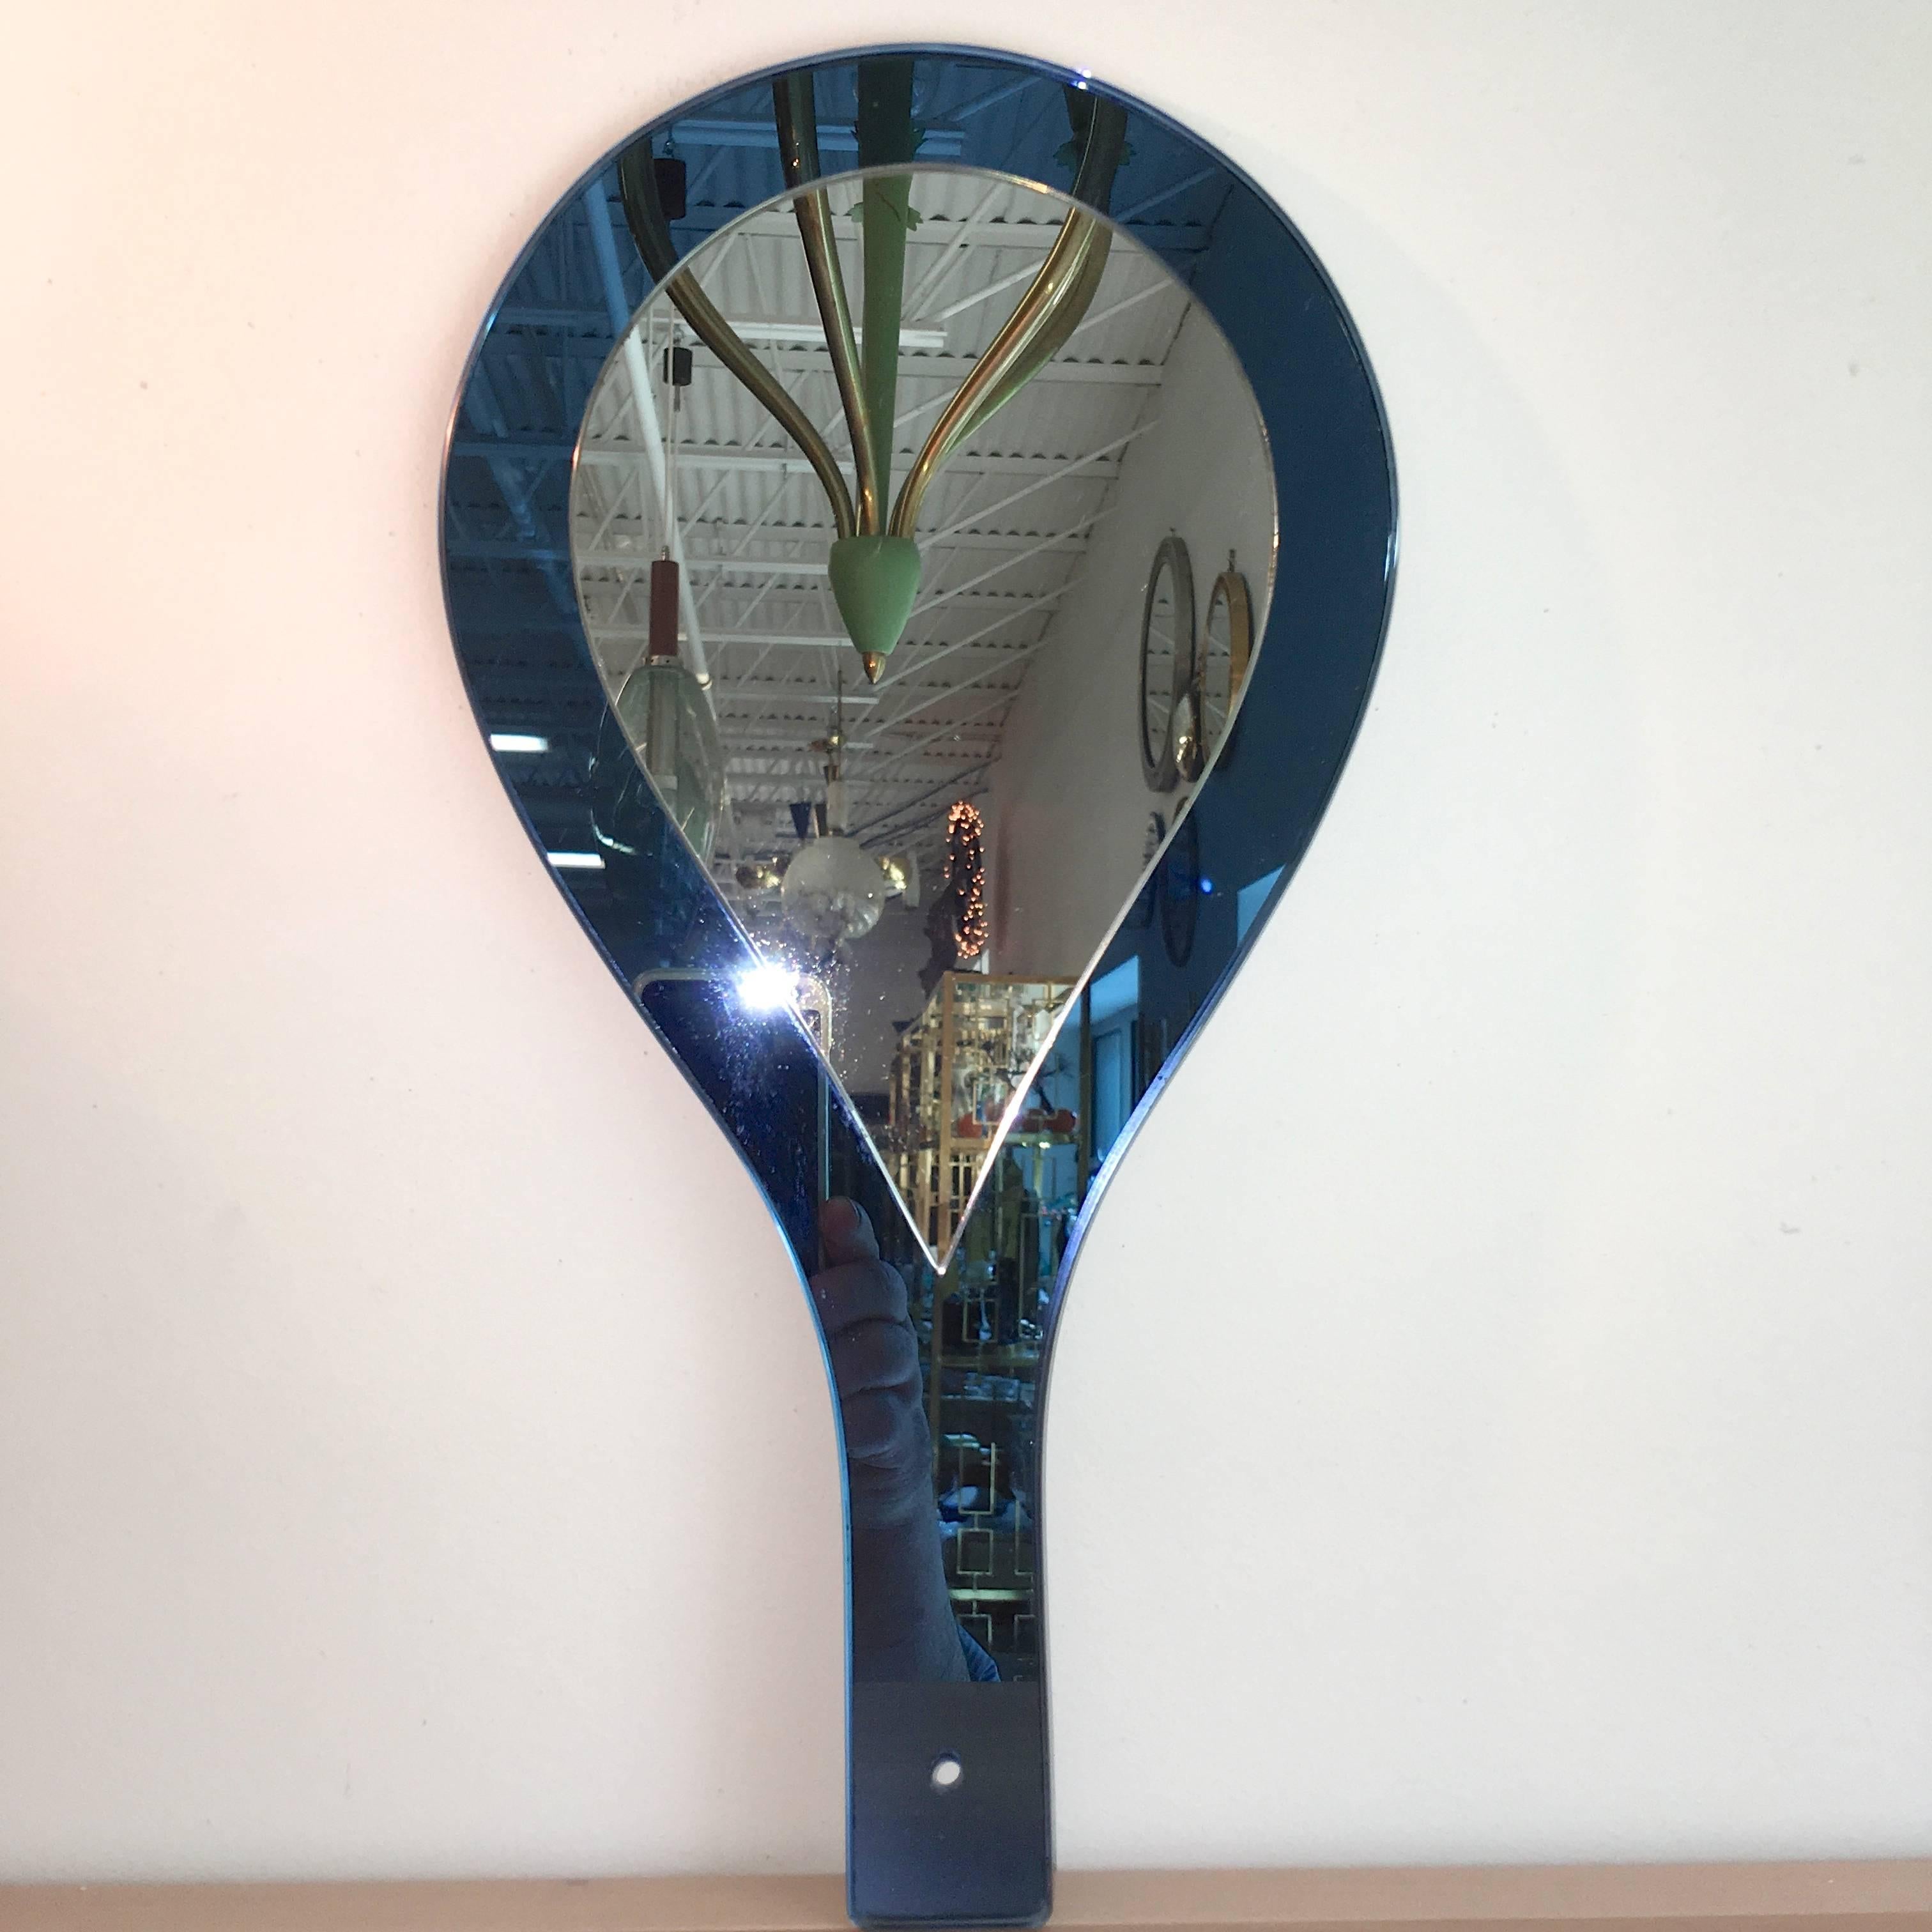 Cristal Art Blue Glass Hand-Held Mirror In Excellent Condition For Sale In Hanover, MA